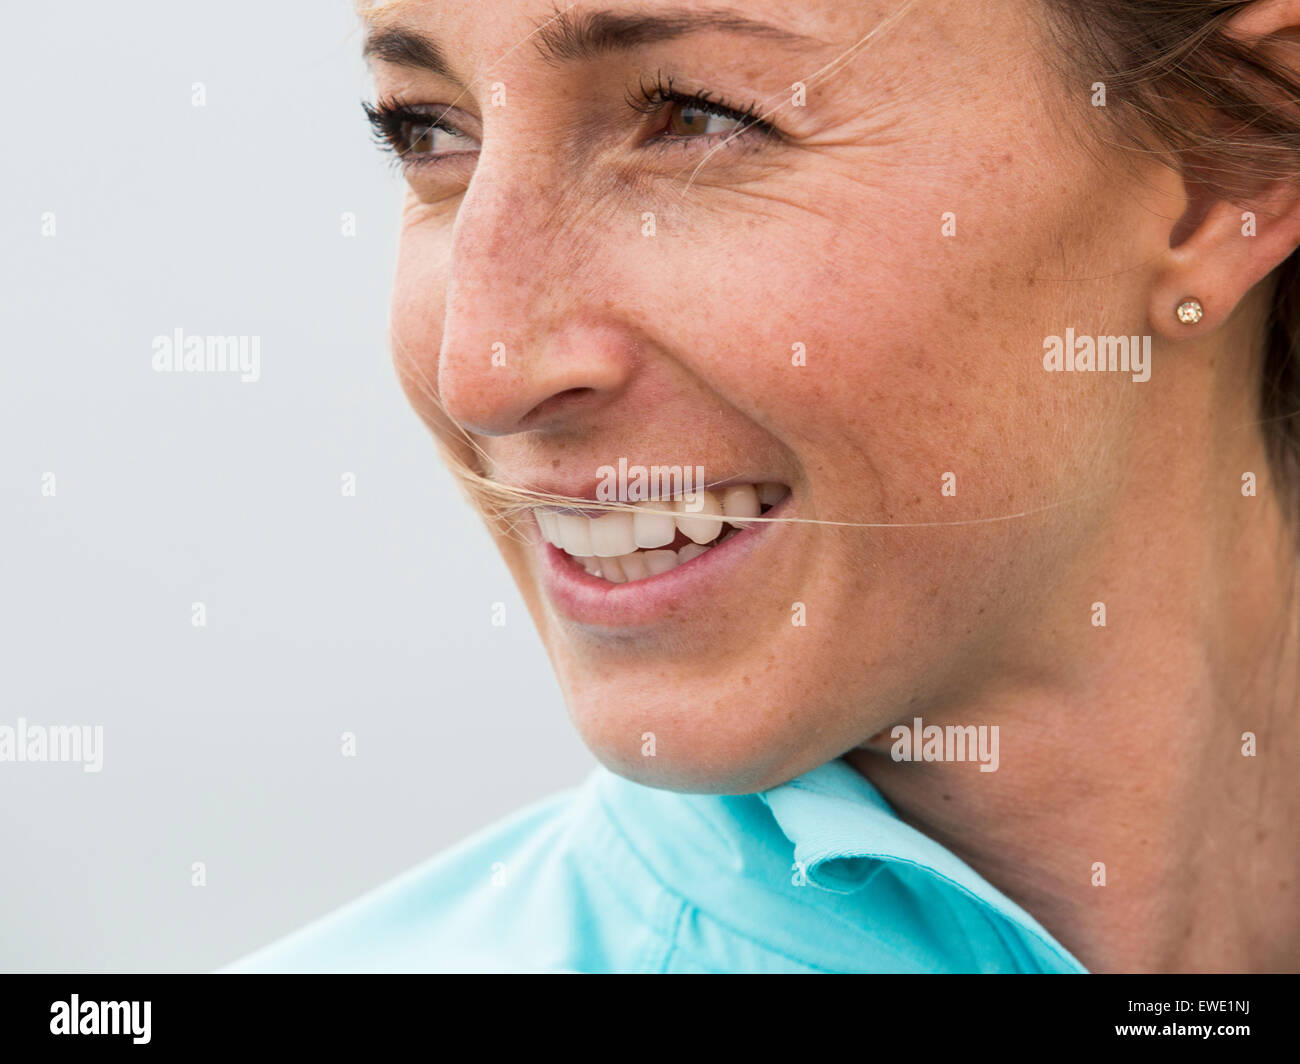 a smiling young woman face looking sideways Stock Photo